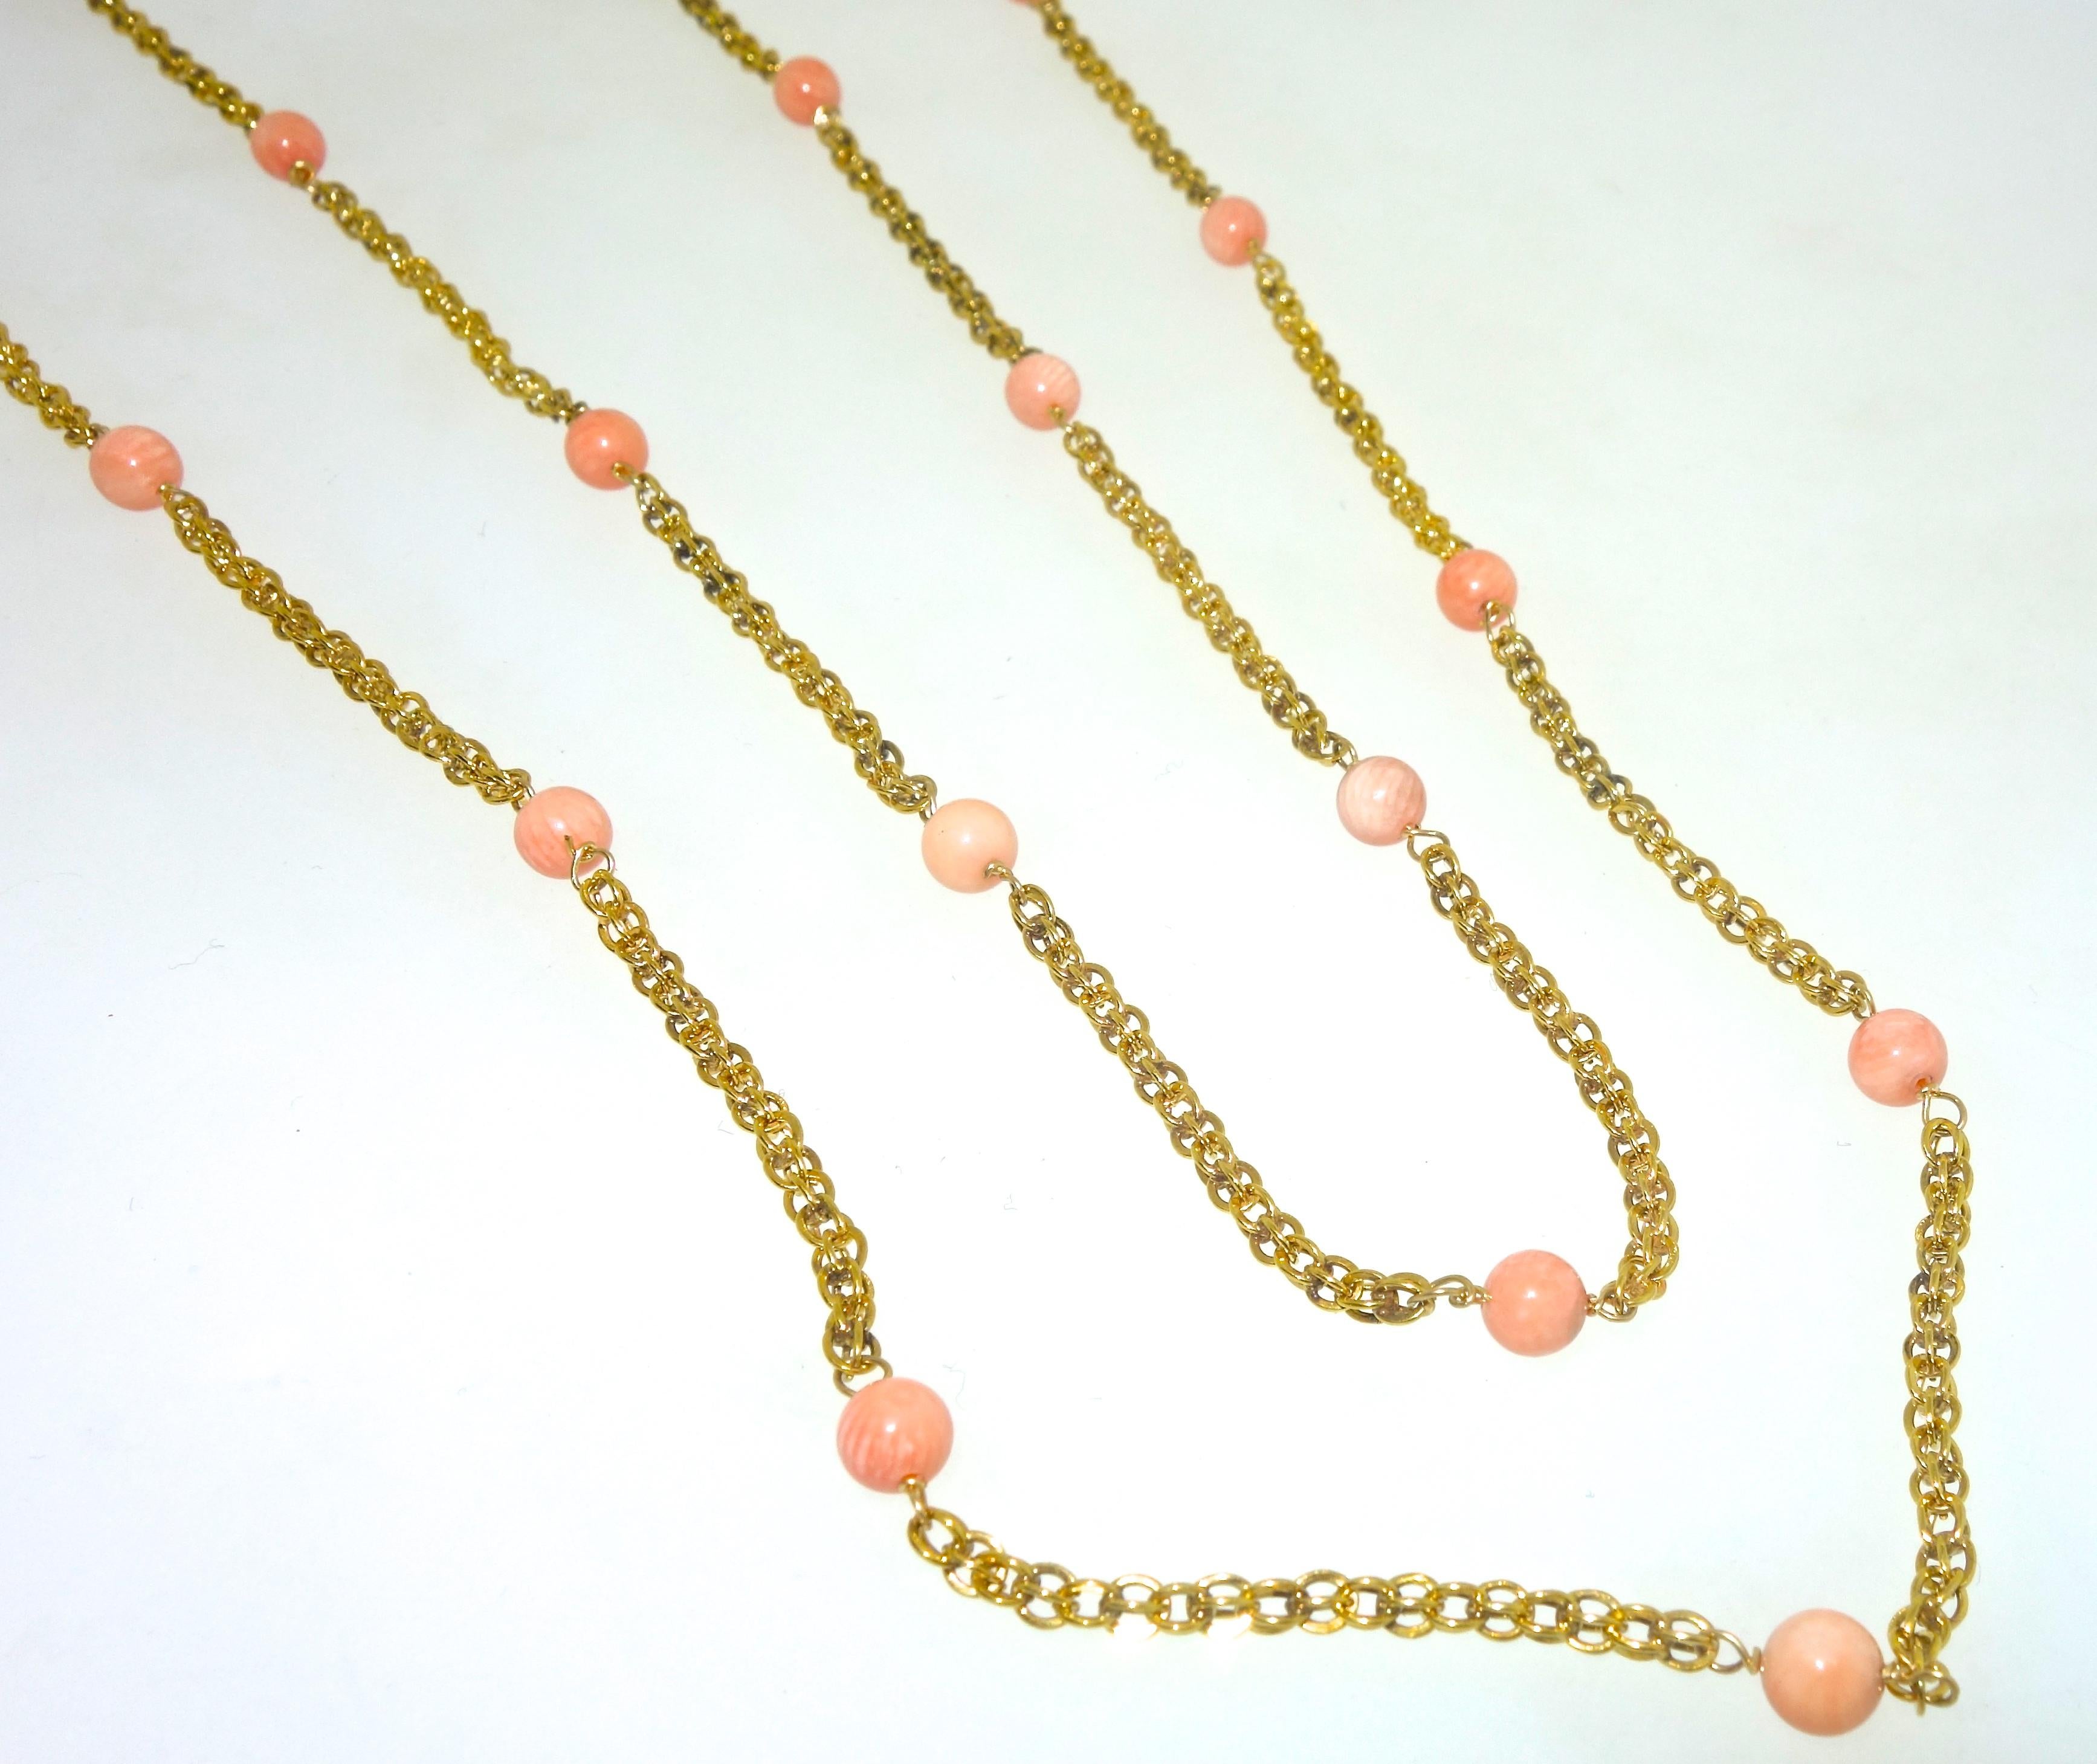 Late 19th Century long gold chain with 31 natural coral beads, the necklace is 61 inches long and can be worn a variety of lengths.  The piece weighs 34.22 grams and is in fine condition, circa 1890